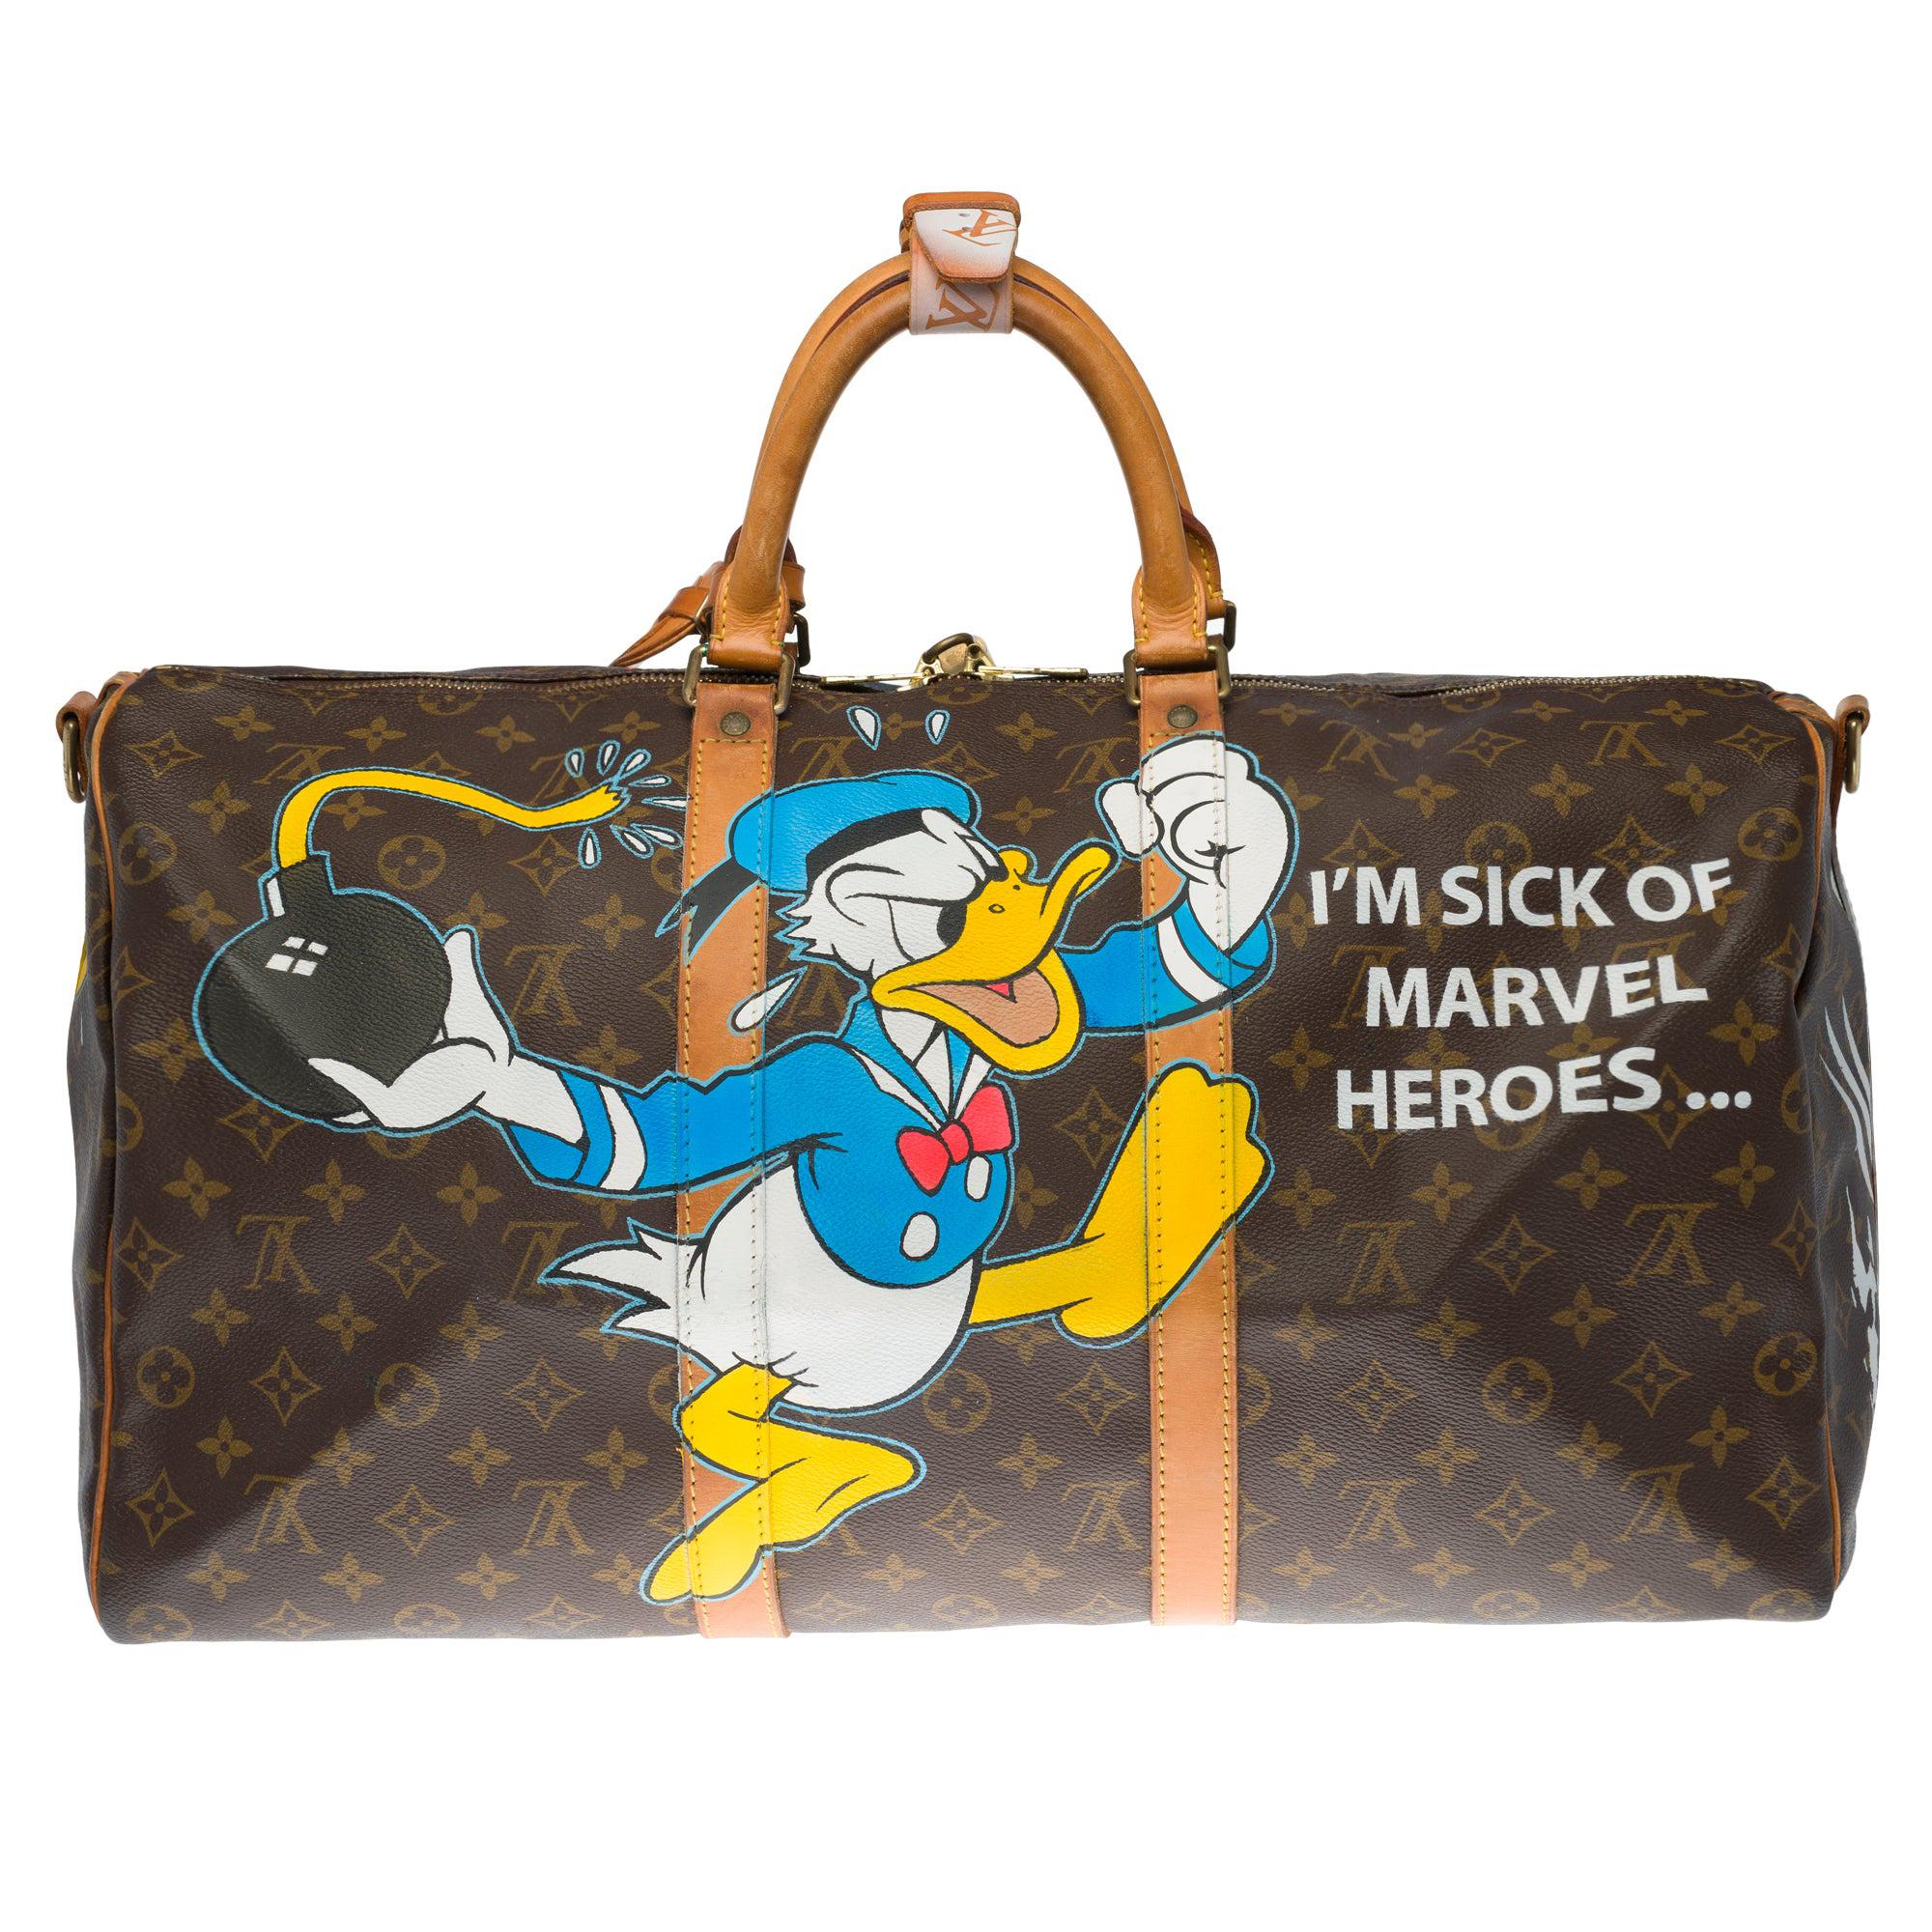 Celebrity Bagsessions Kanye West Loves But Also Hates Louis Vuitton   The Bagateur